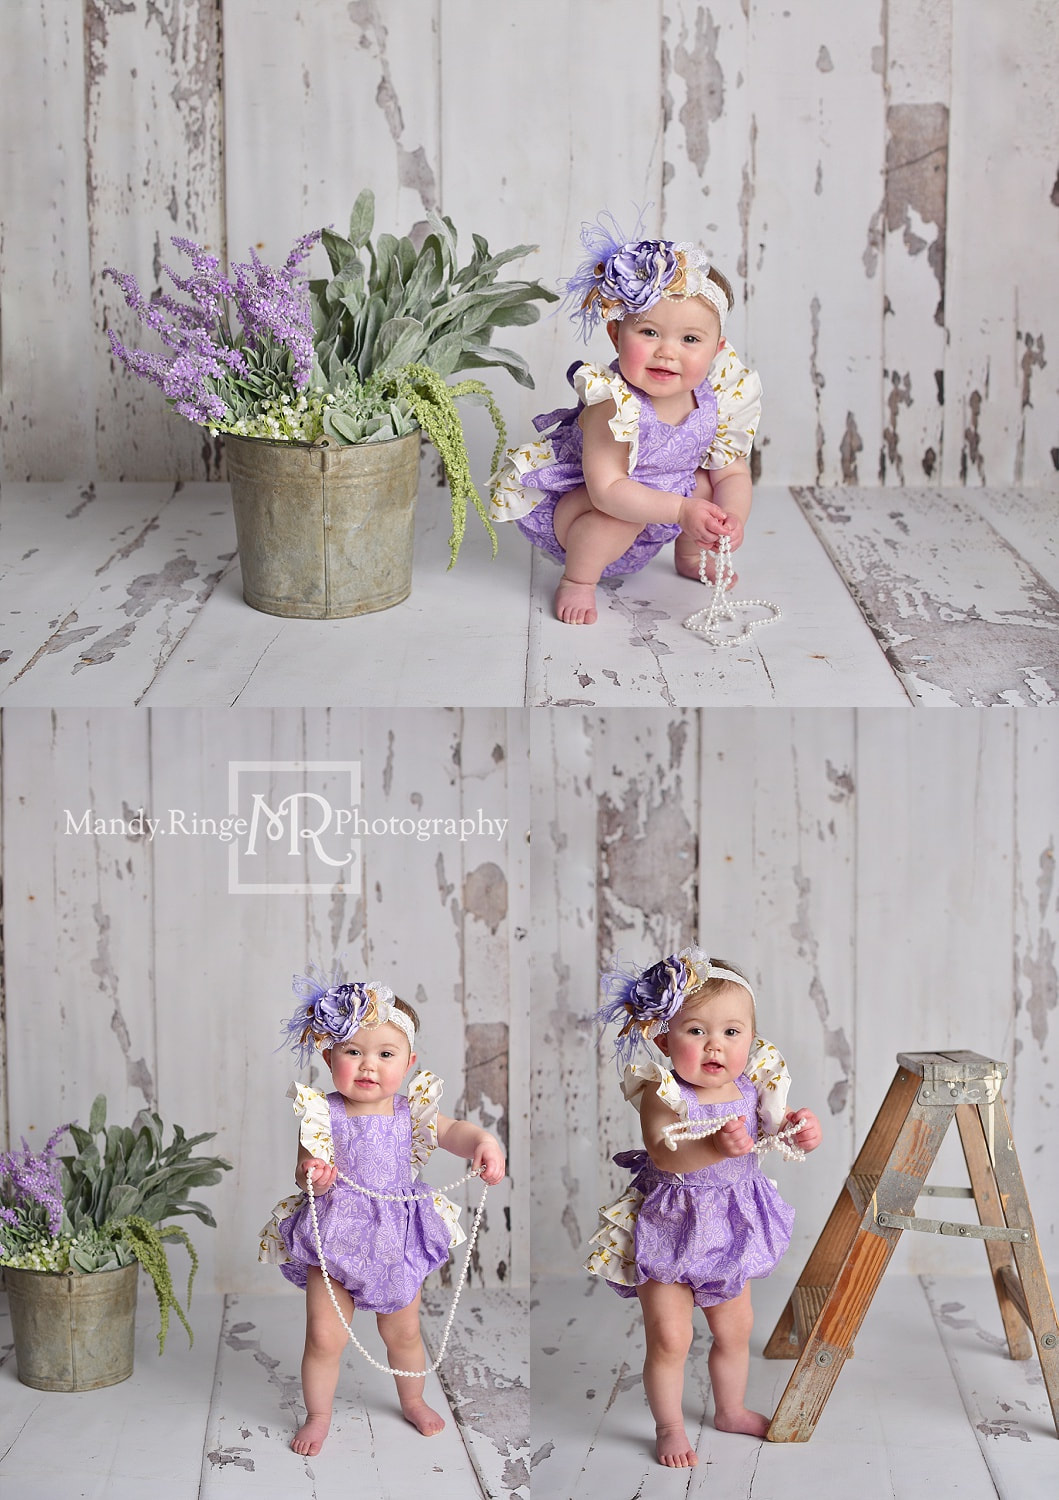 Baby girl first birthday portraits // milestone, one year old, purple, shabby white wood backdrop, pearls // by Mandy Ringe Photography // St. Charles, IL Photographer